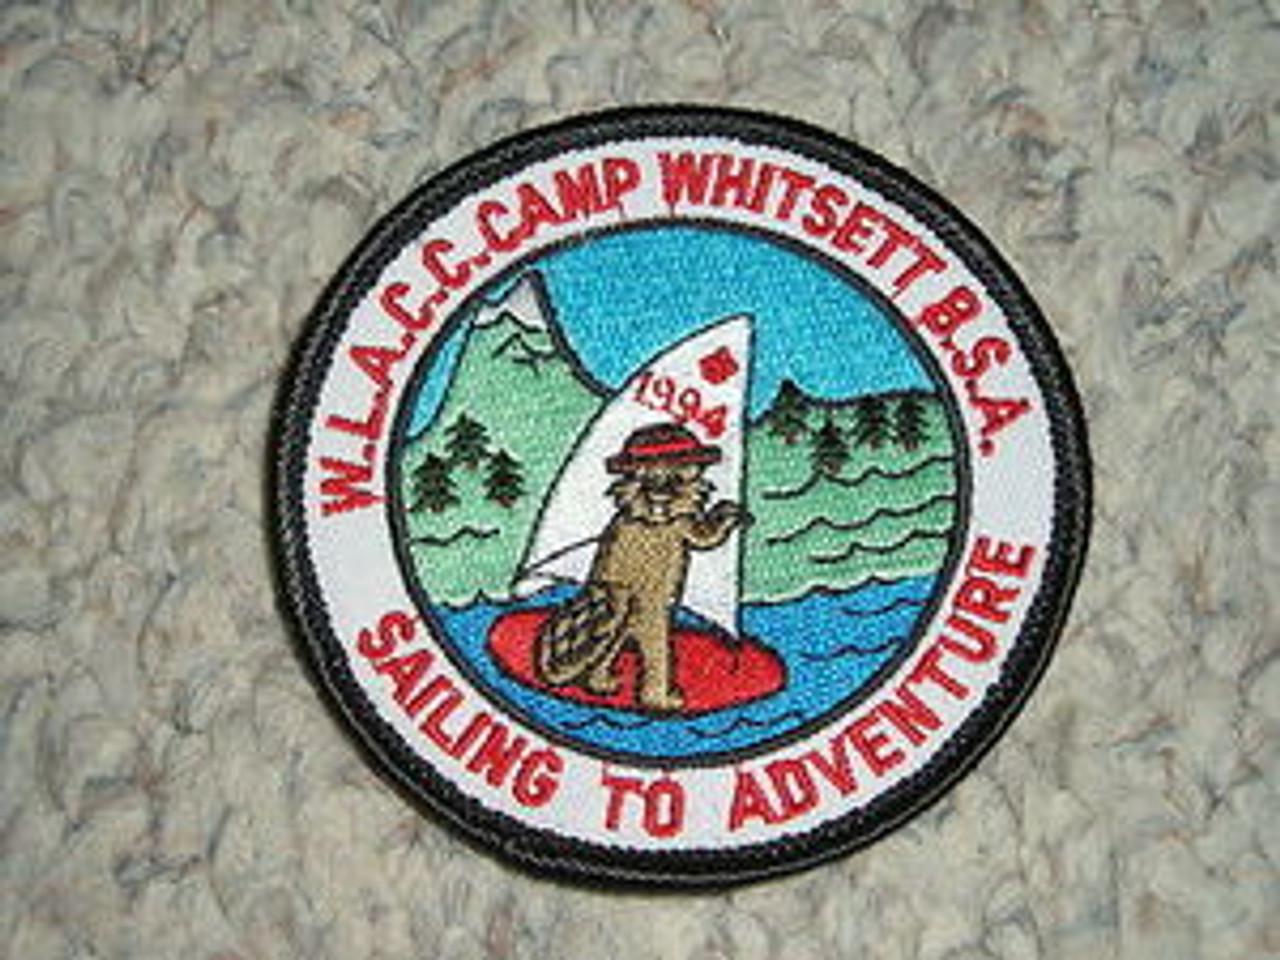 1994 Camp Whitsett Patch - Scout